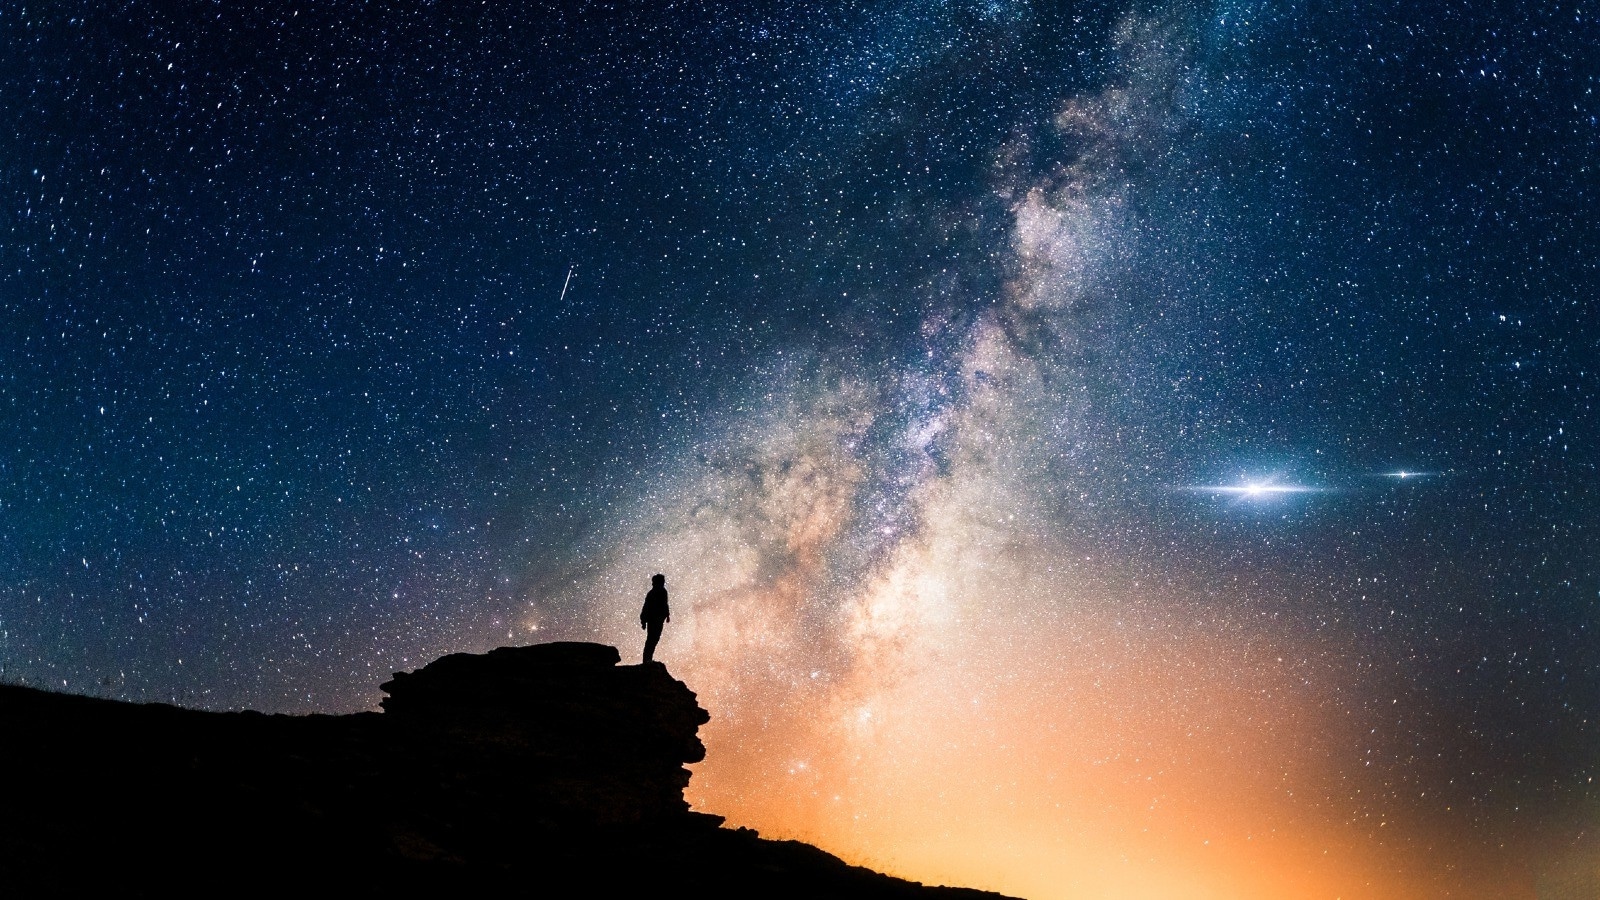 Man on cliff looking at stars and sky